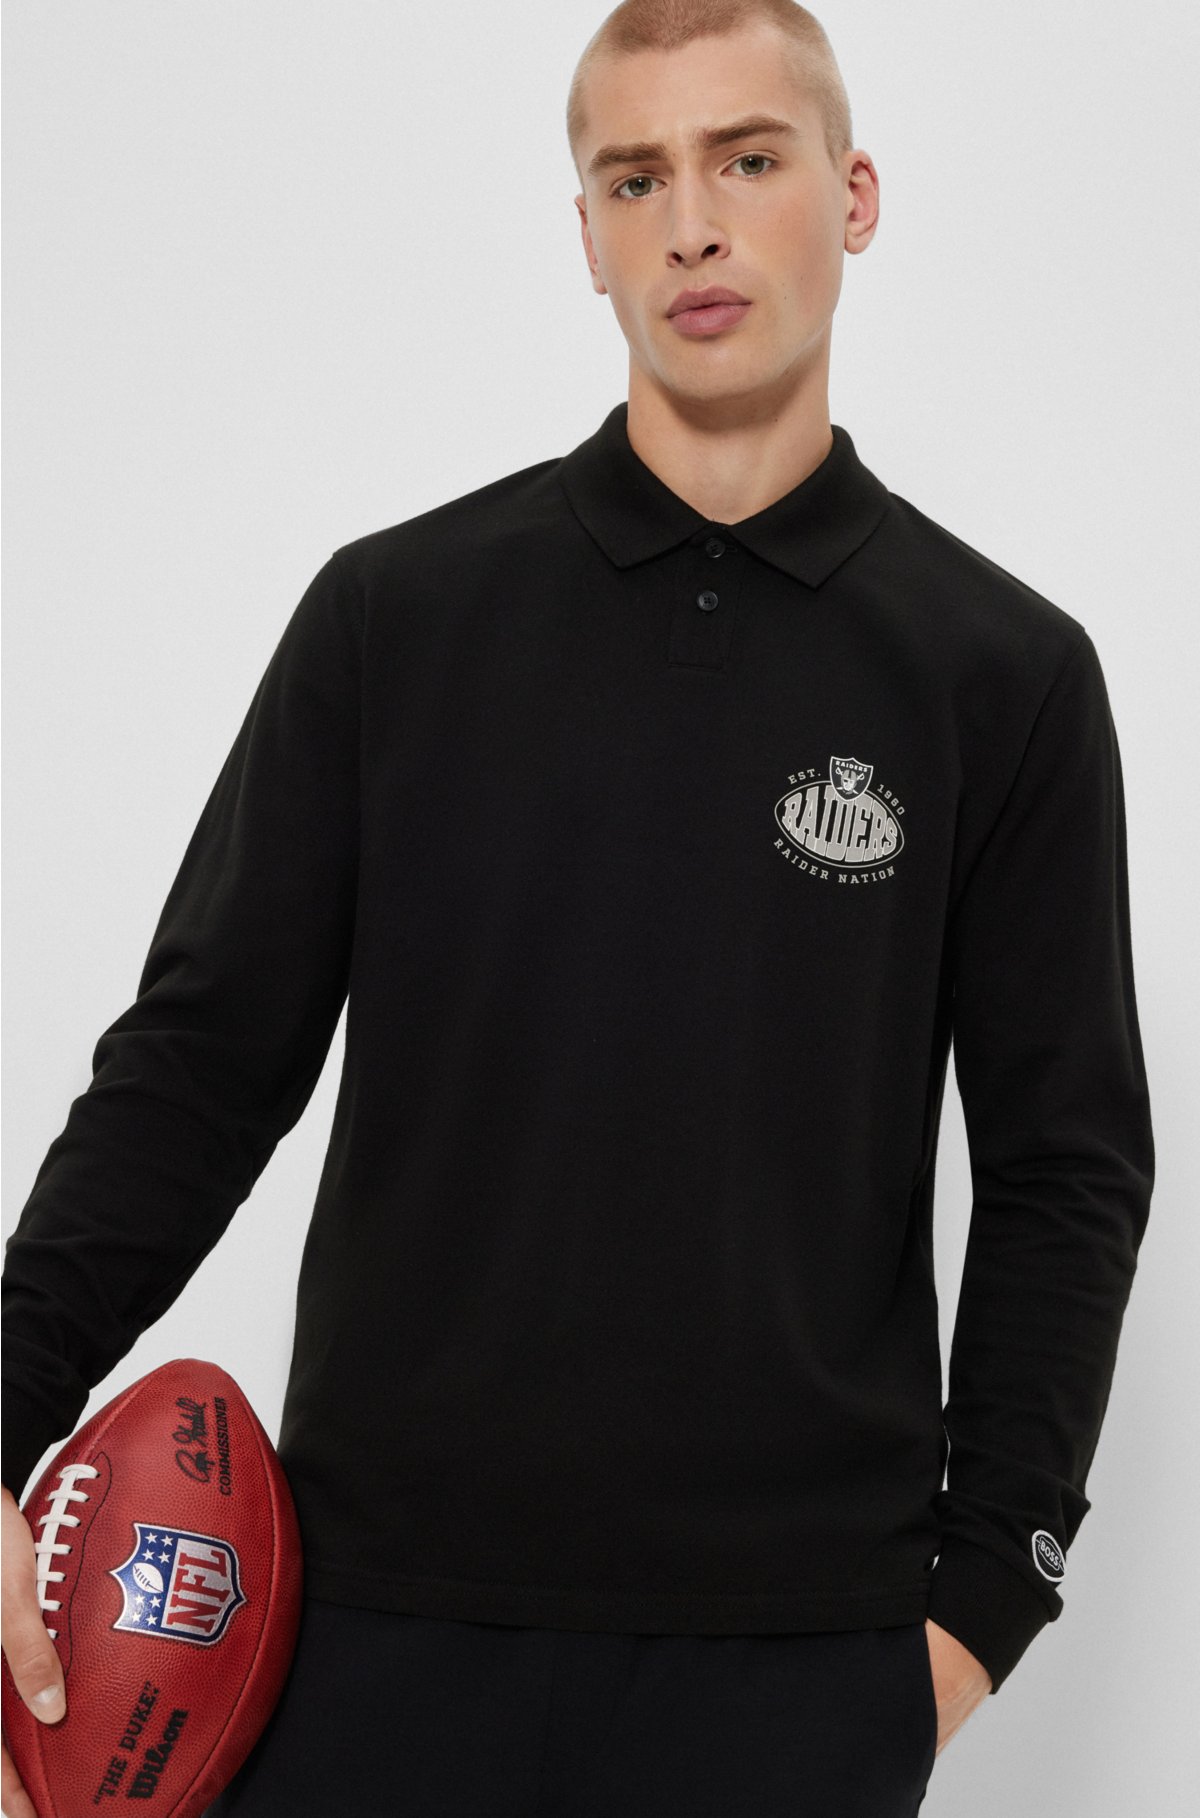 BOSS x NFL long-sleeved polo shirt with collaborative branding, Raiders